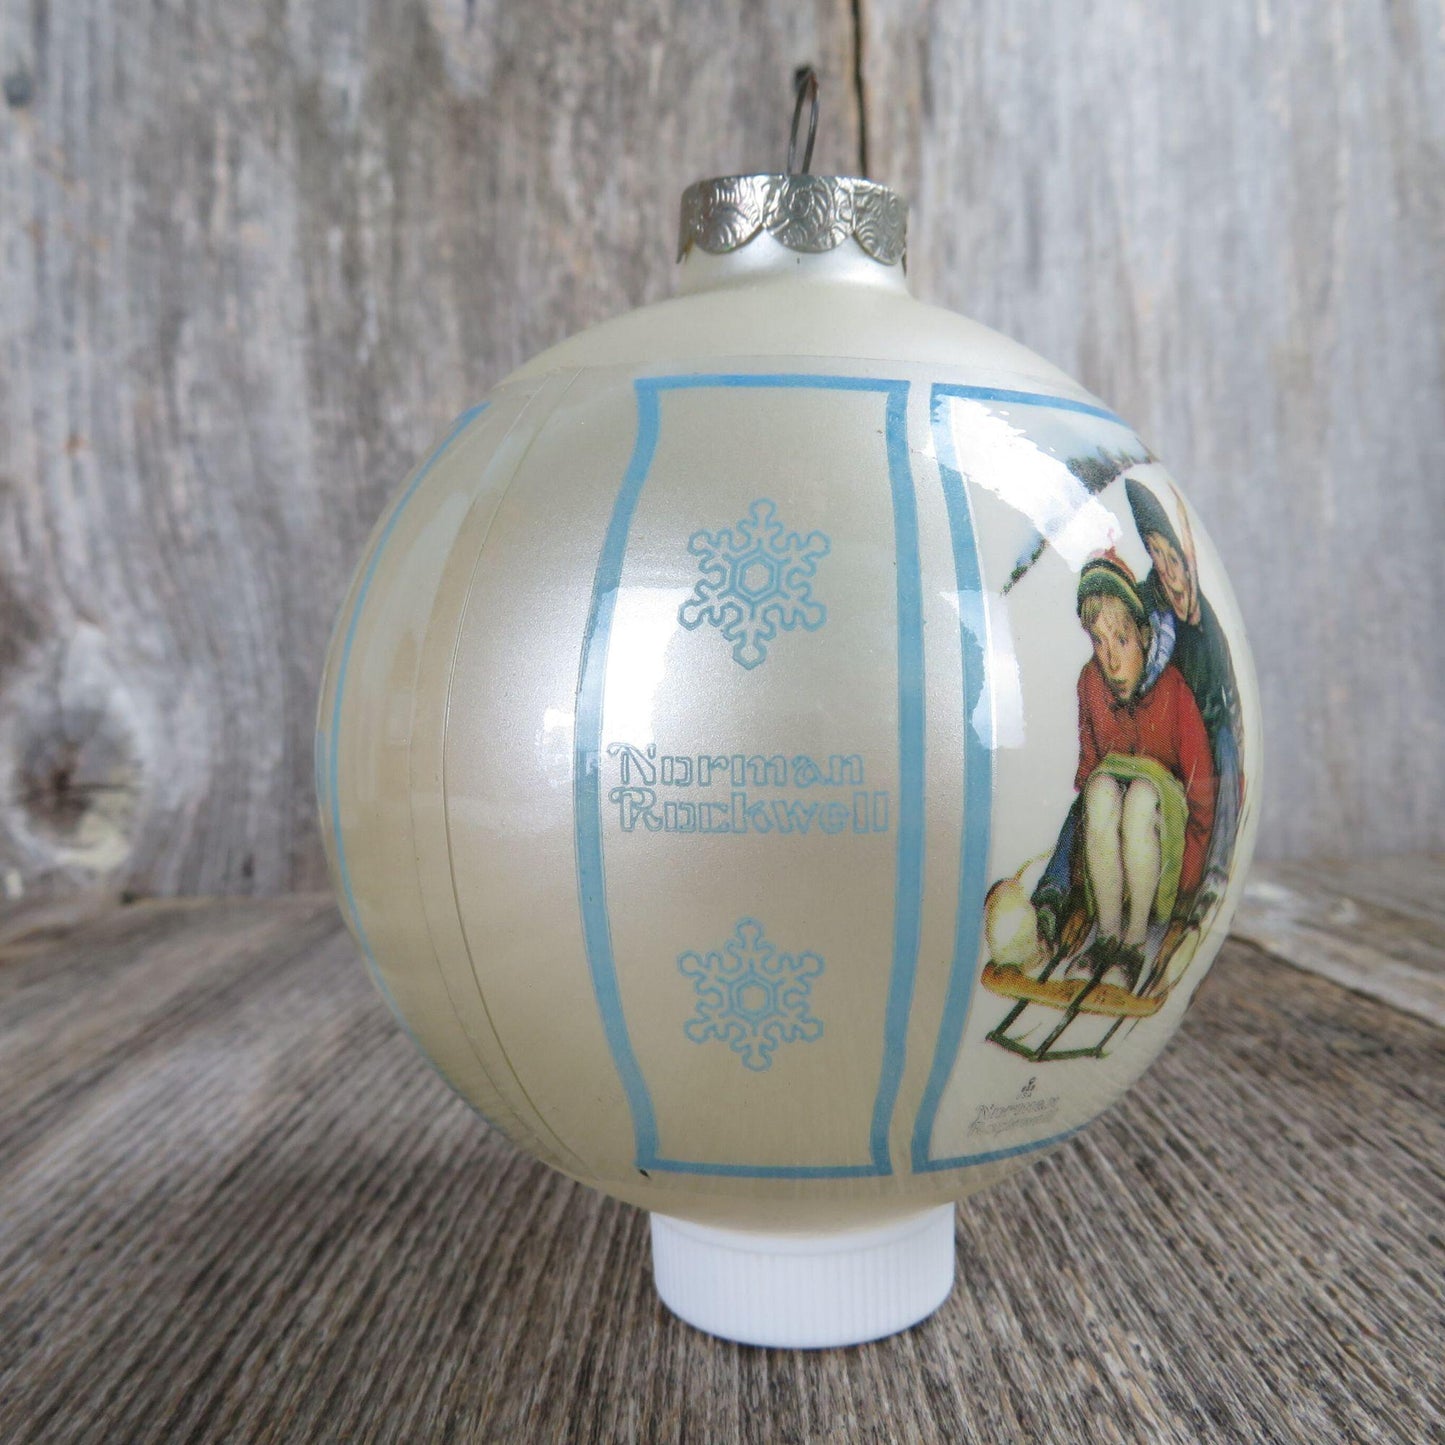 Vintage Norman Rockwell Ball Ornament Downhill Daring Schmid Christmas 1980 Blue White Silver